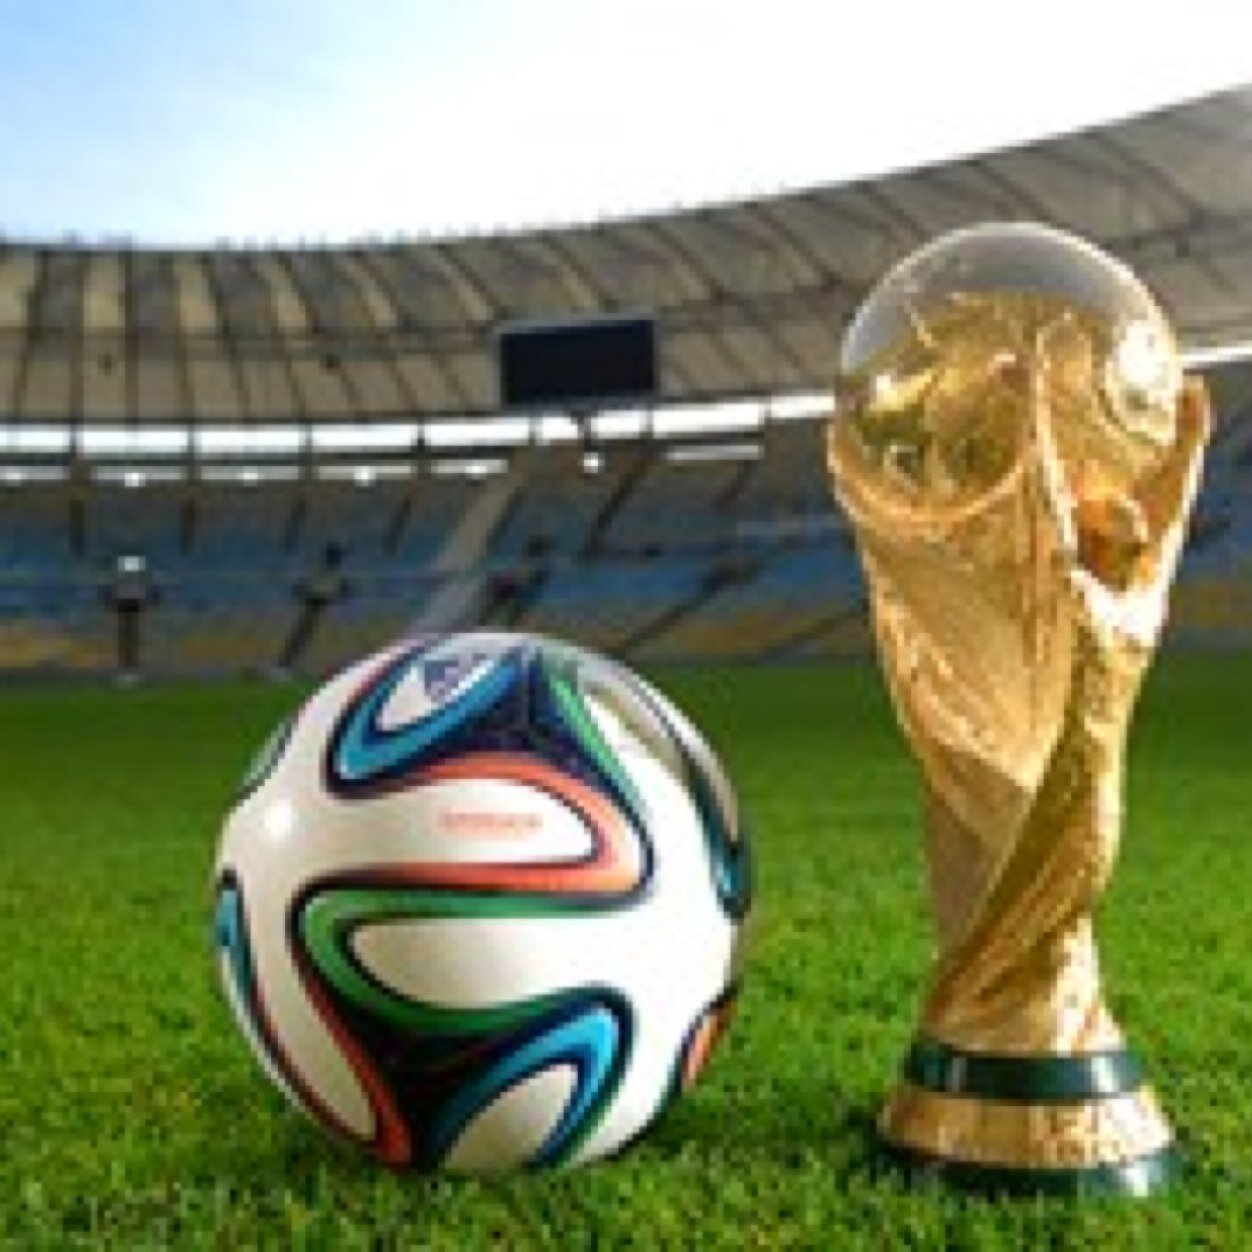 Updates on the Fifa World Cup 2014 in Brasil. #fifaworldcup #brasil2014